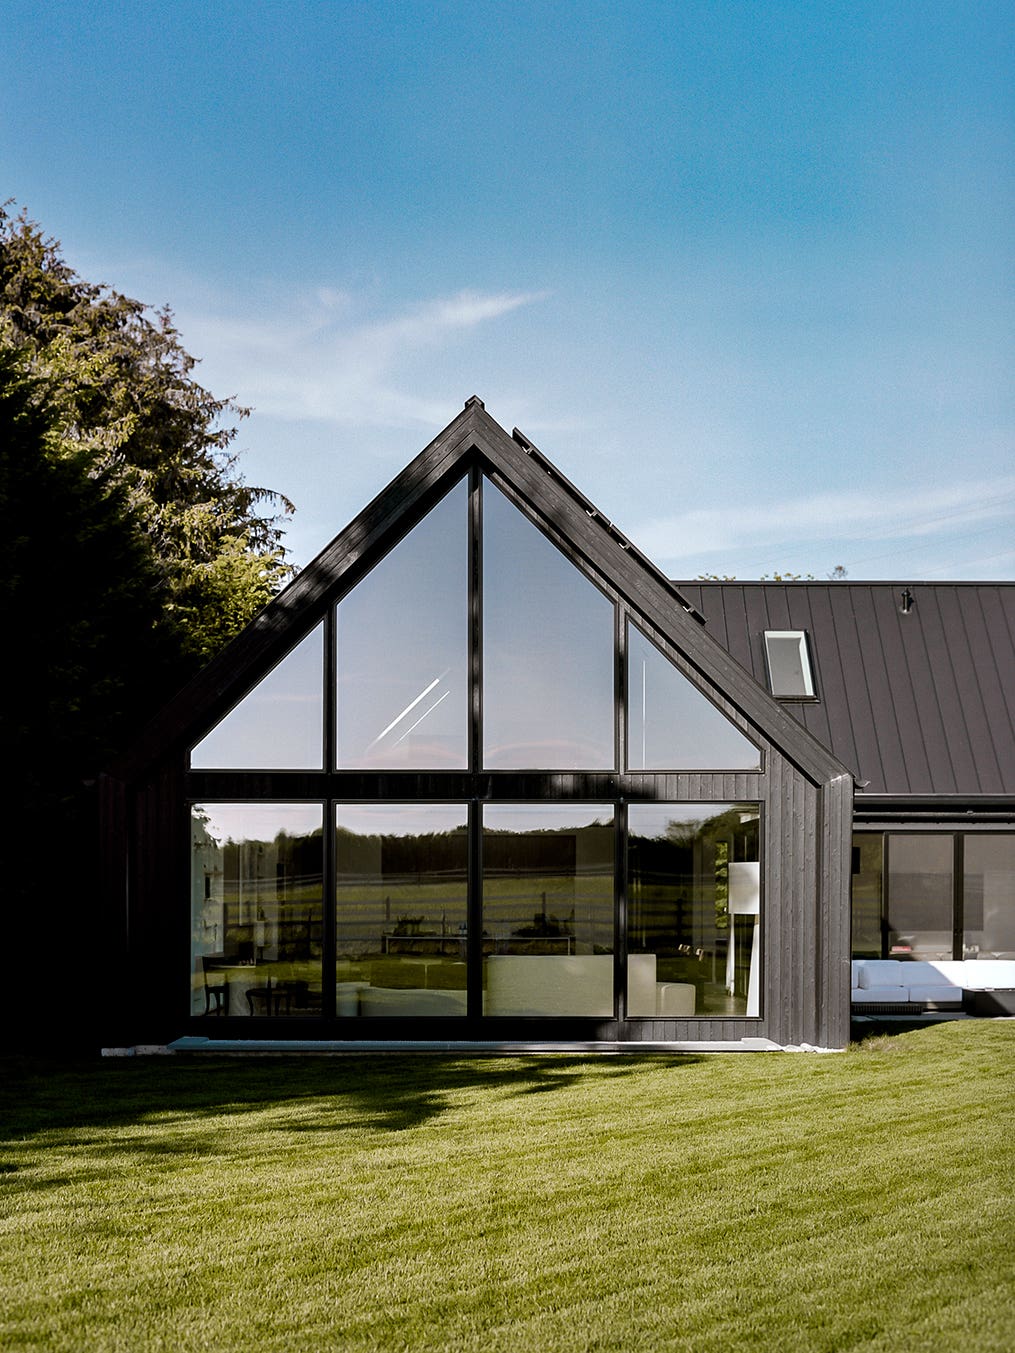 Black a-frame exterior with tons of windows